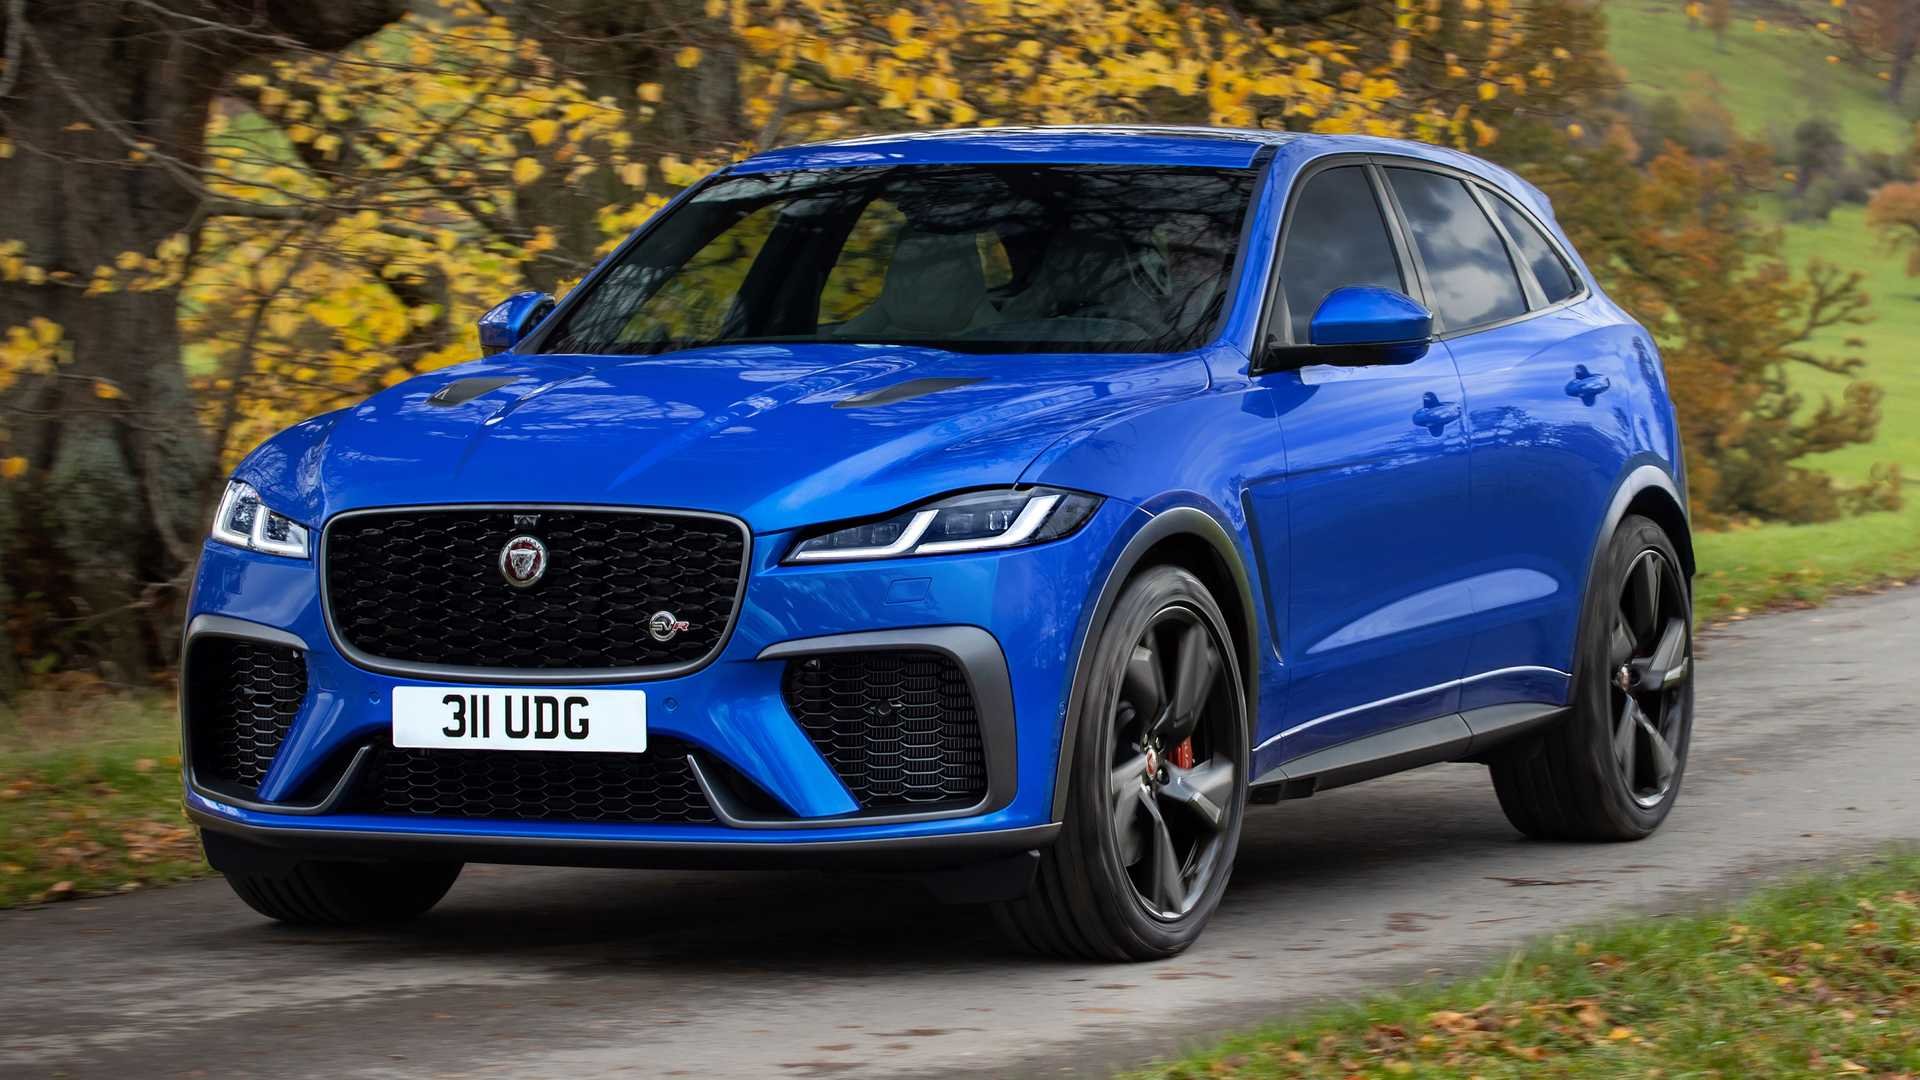 2021 Jaguar F-Pace SVR Debuts With Better Acceleration, Higher Top Speed